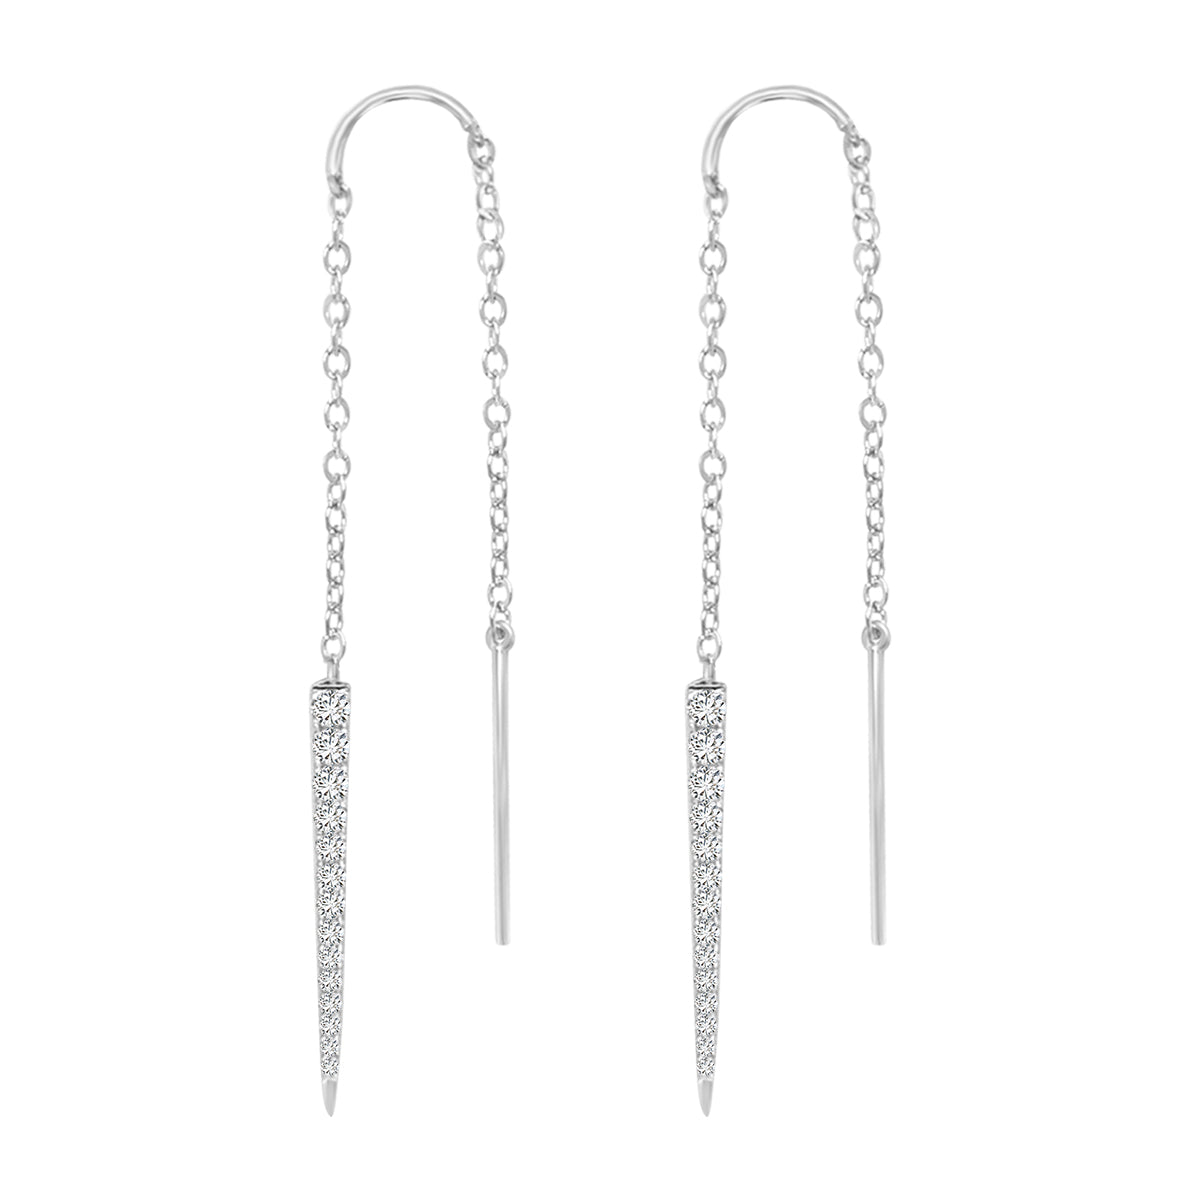 Needle And Thread Earrings With Diamonds In 18k White Gold.